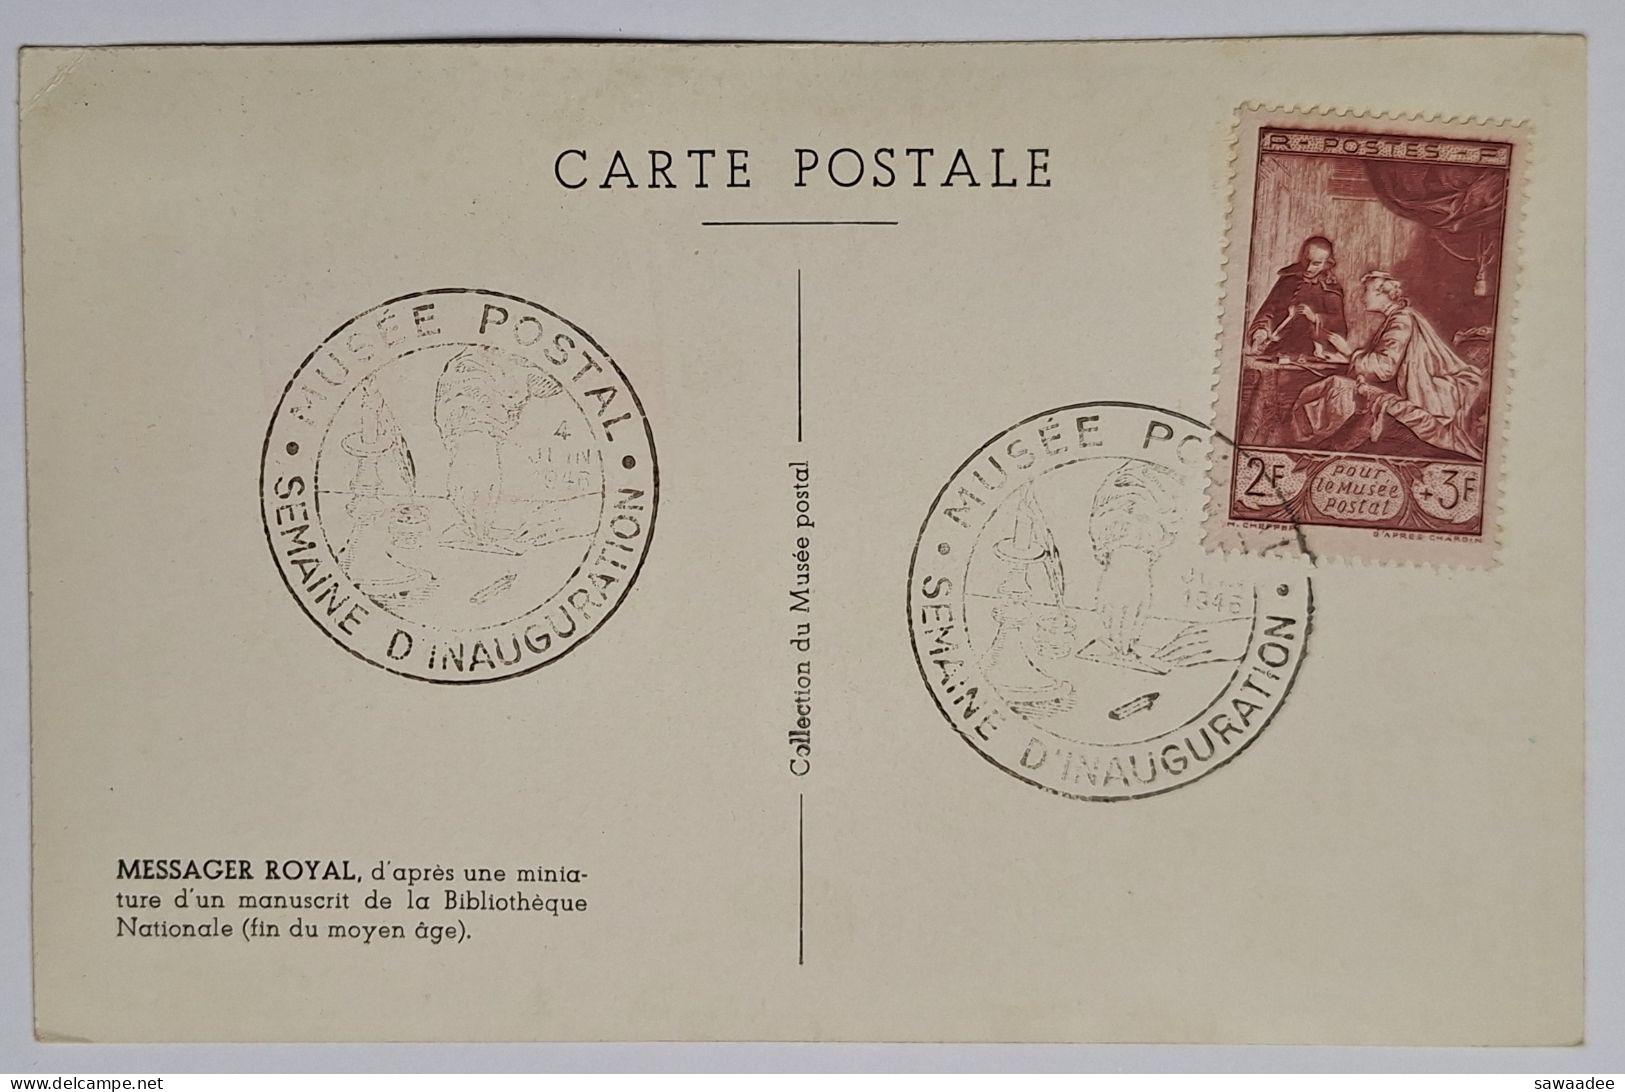 CARTE POSTALE FRANCE - MUSEE POSTAL - SEMAINE D'INAUGURATION - MESSAGER ROYAL - Poste & Facteurs